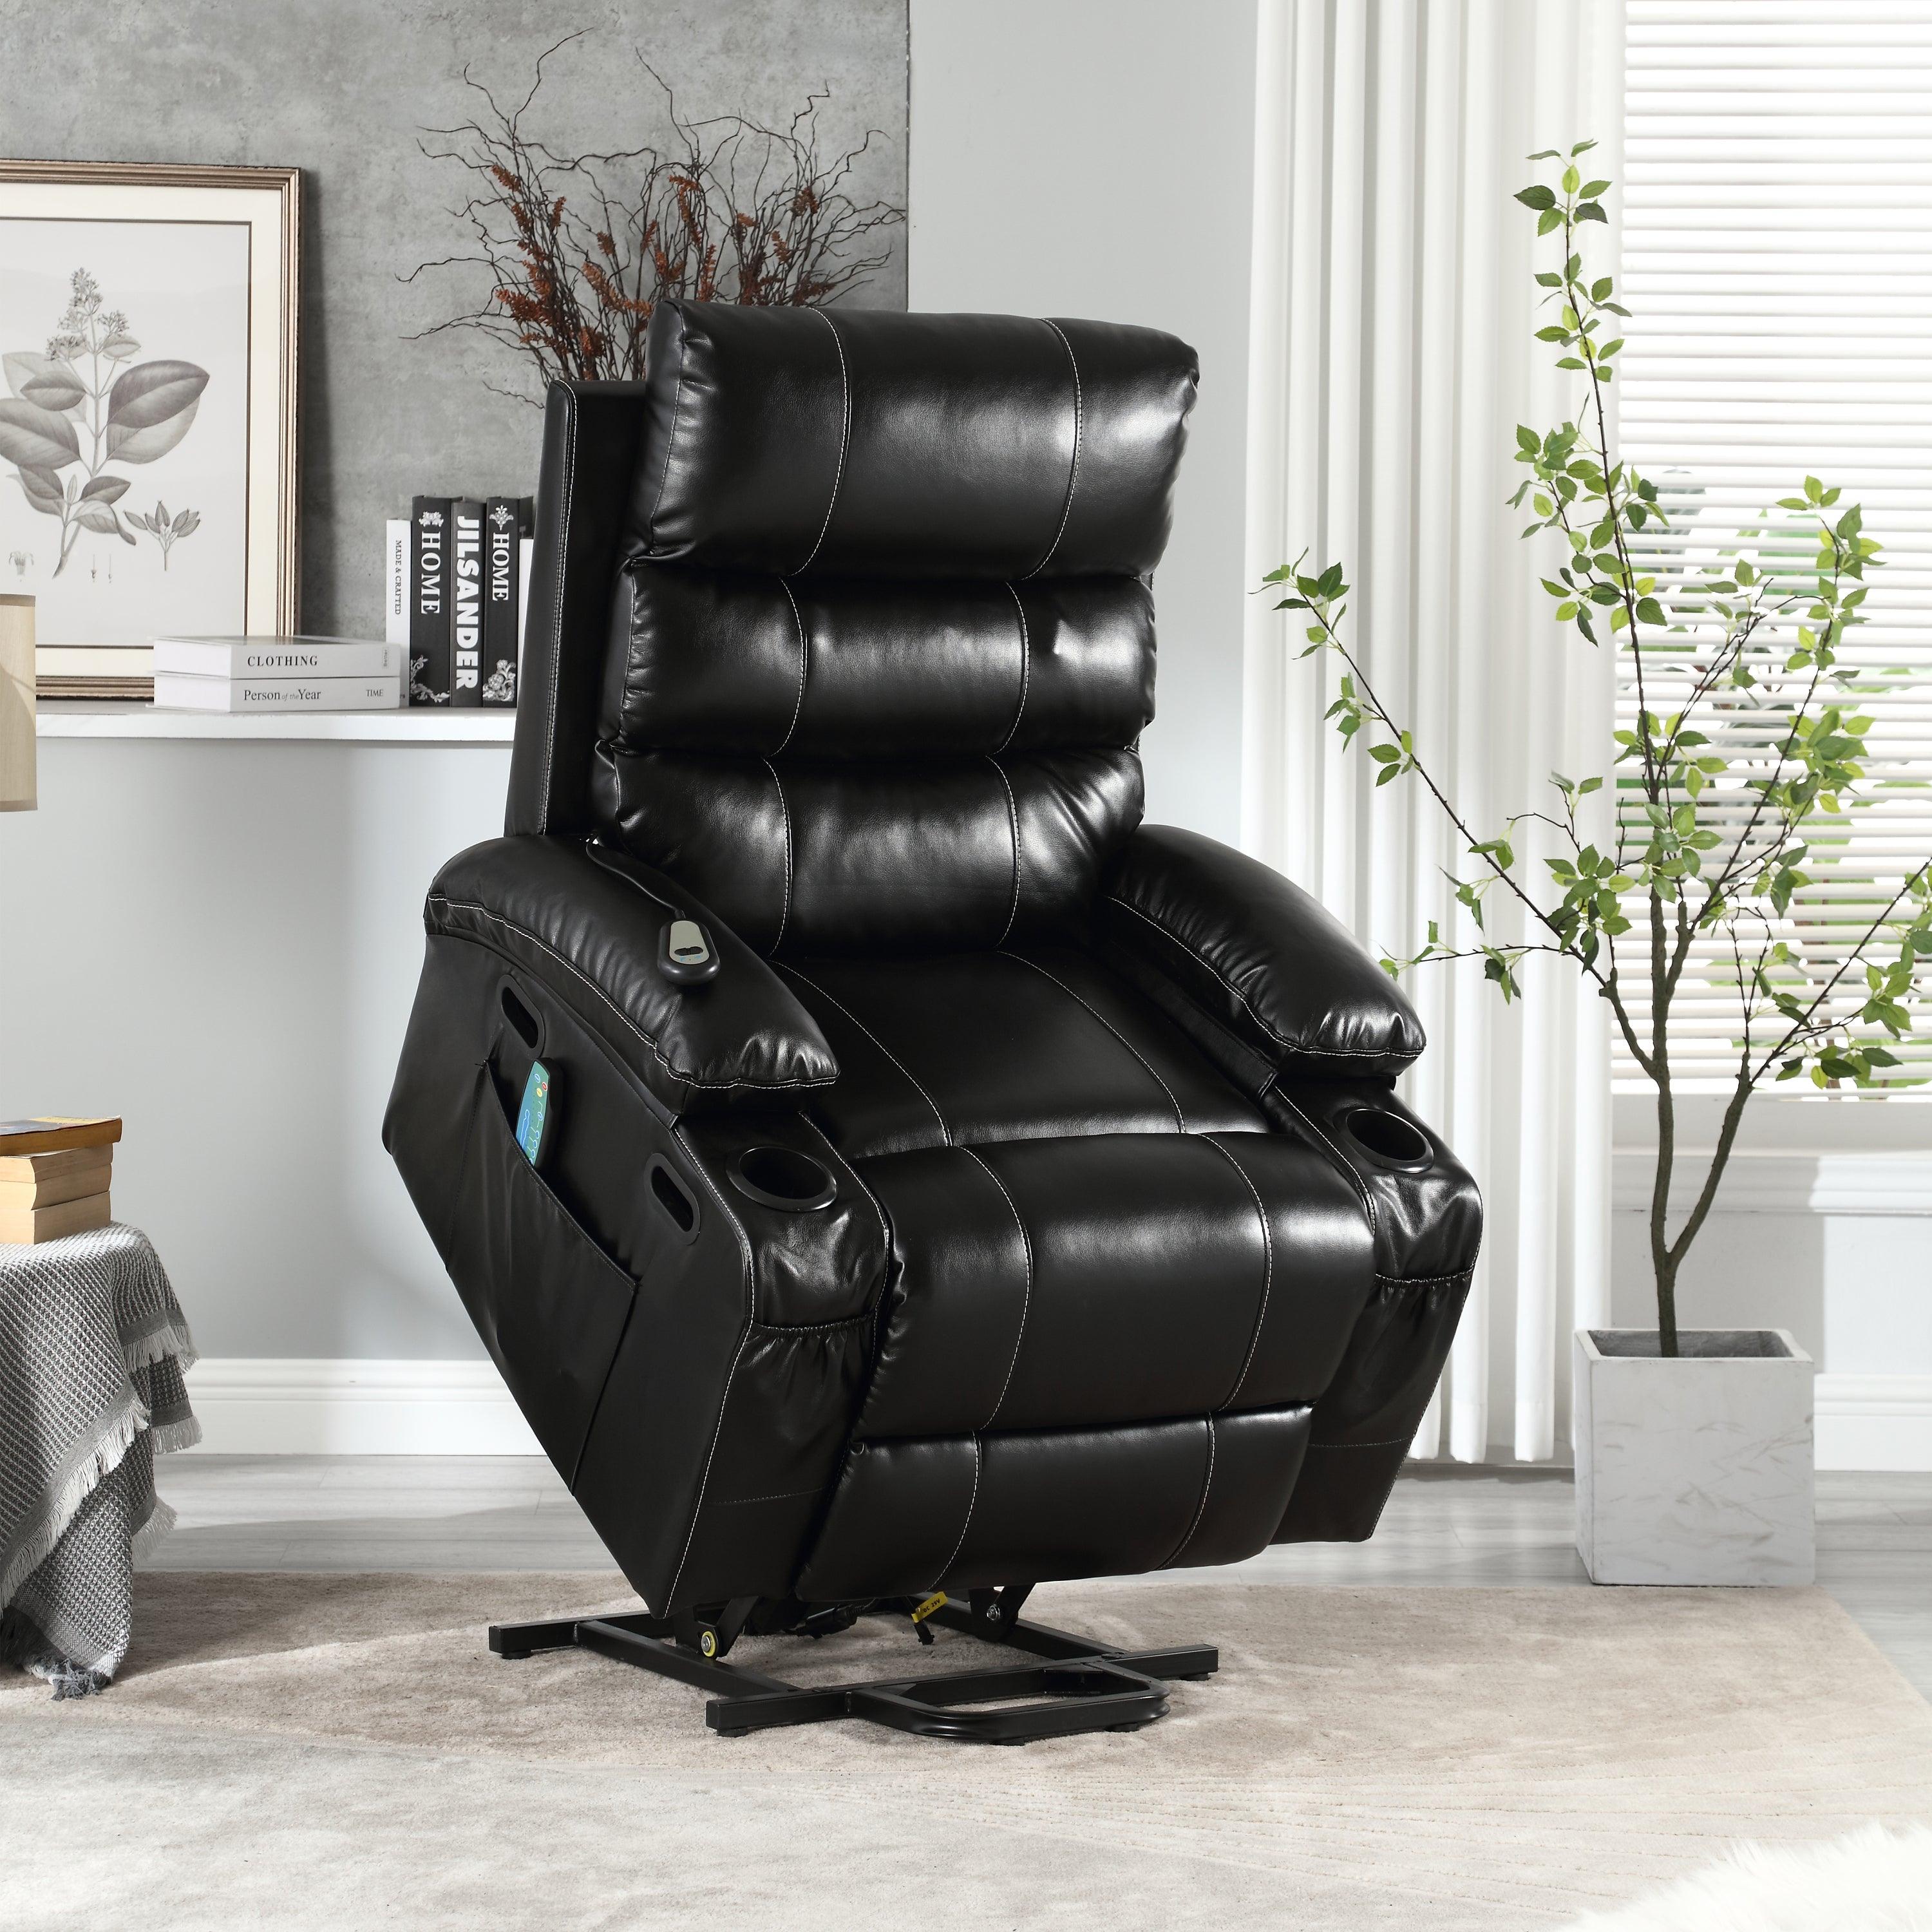 🆓🚛 21" Seat Width Electric Power Lift Recliner Chair Sofa for Elderly, 8 Point Vibration Massage & Lumber Heat, Remote Control, Side Pockets & Cup Holders, Black